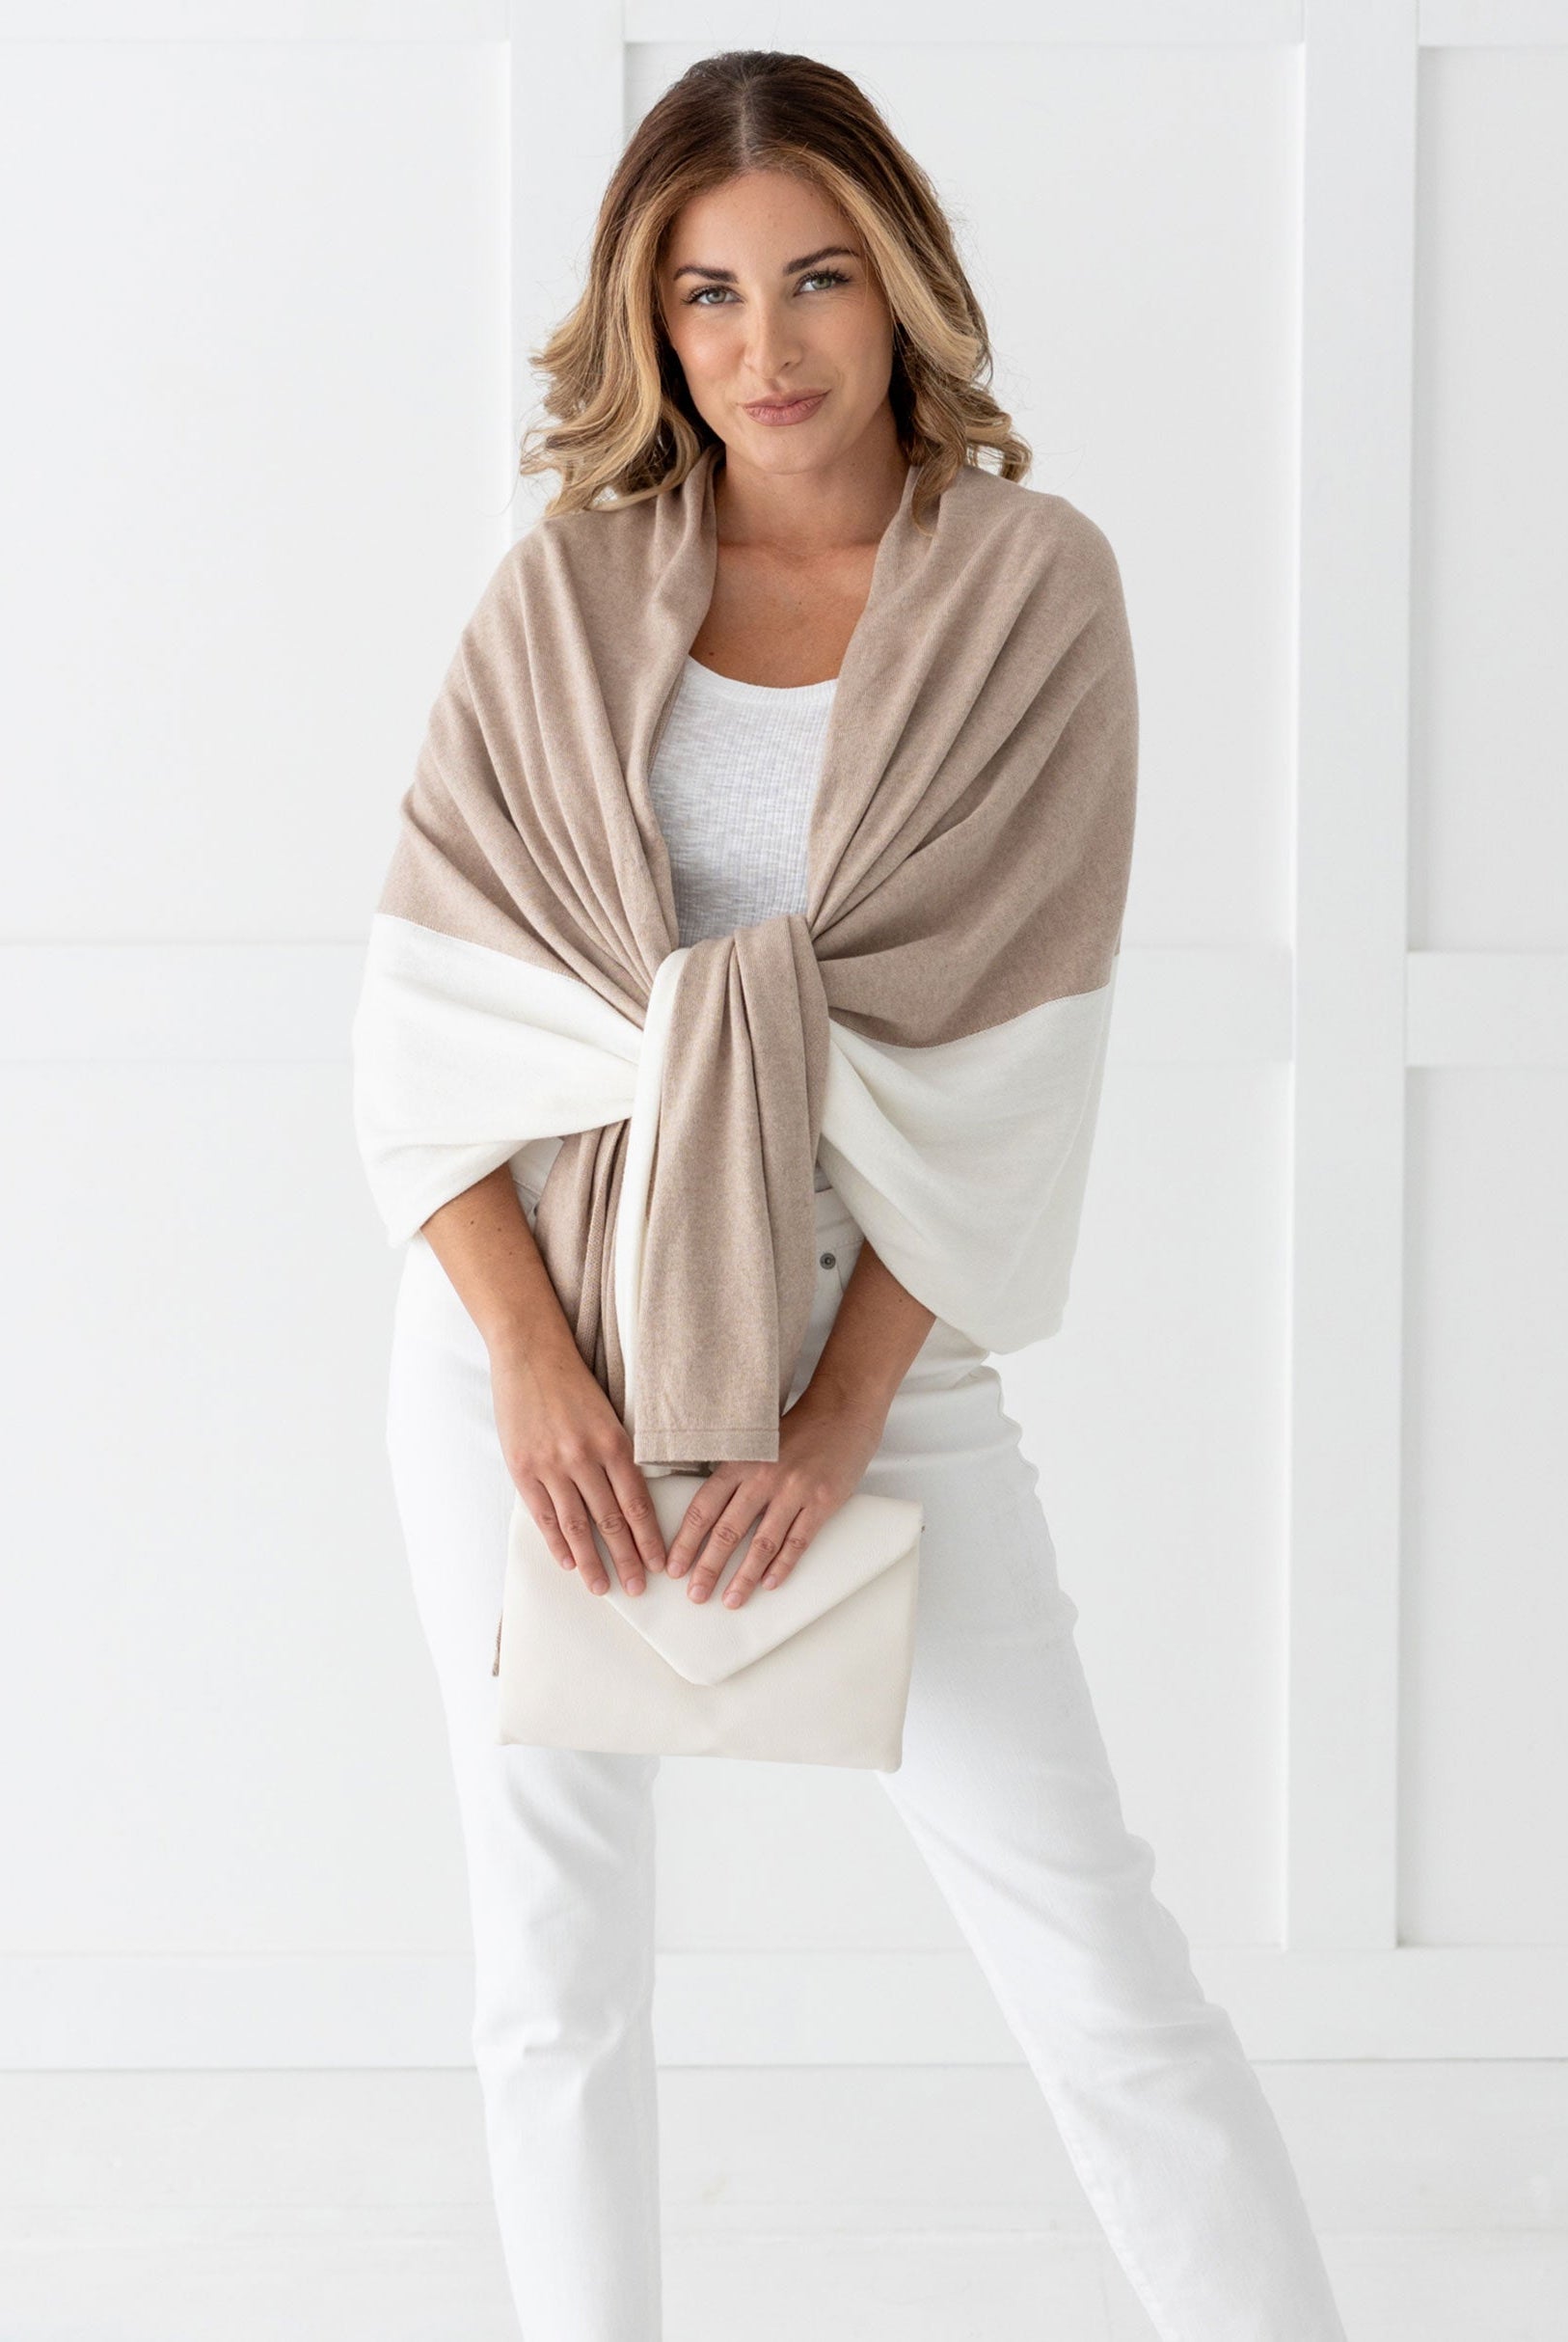 Woman wearing the Cashmere Cotton Luxe Travel Scarf in Sandstone and Ivory Colorblock which is a tan and cream scarf